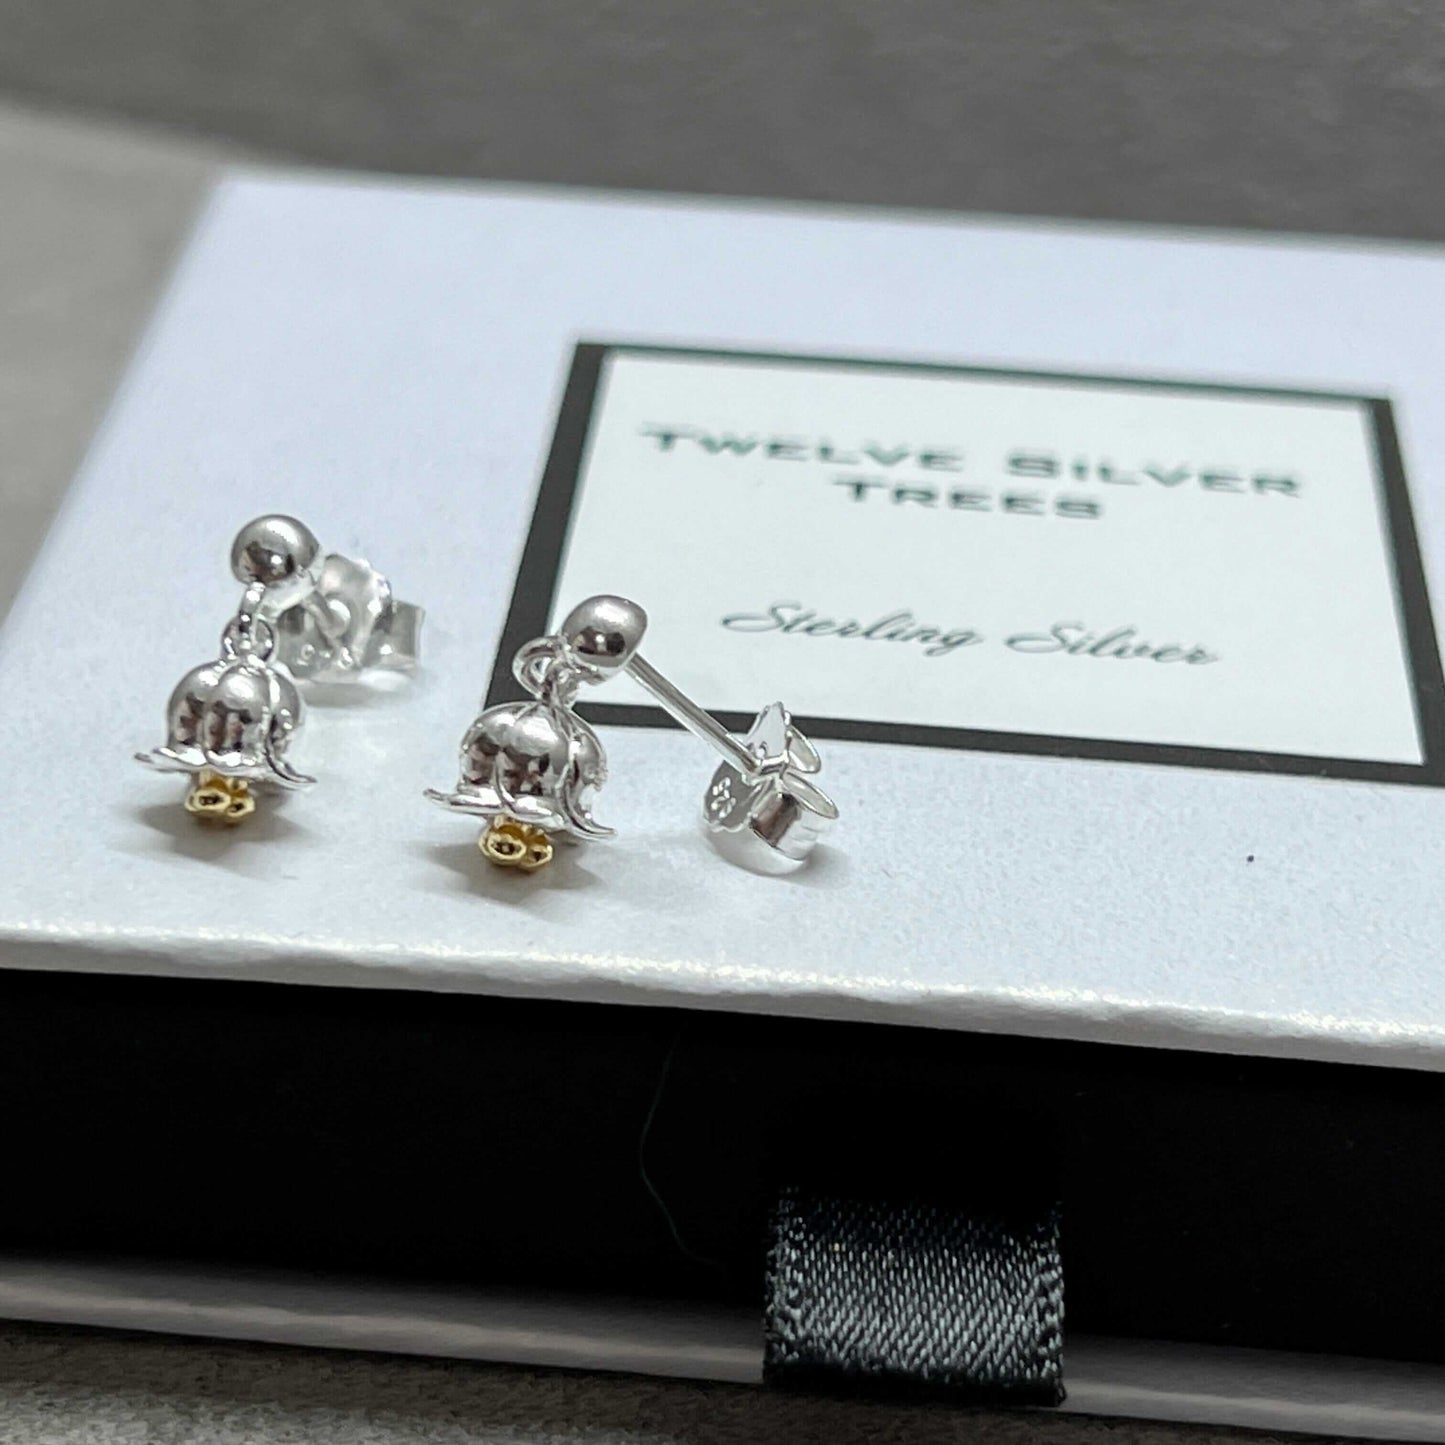 2 Tone Lily Of The Valley Stud Earrings in Sterling Silver & 18 Carat Gold - May Birth Flower - Twelve Silver Trees